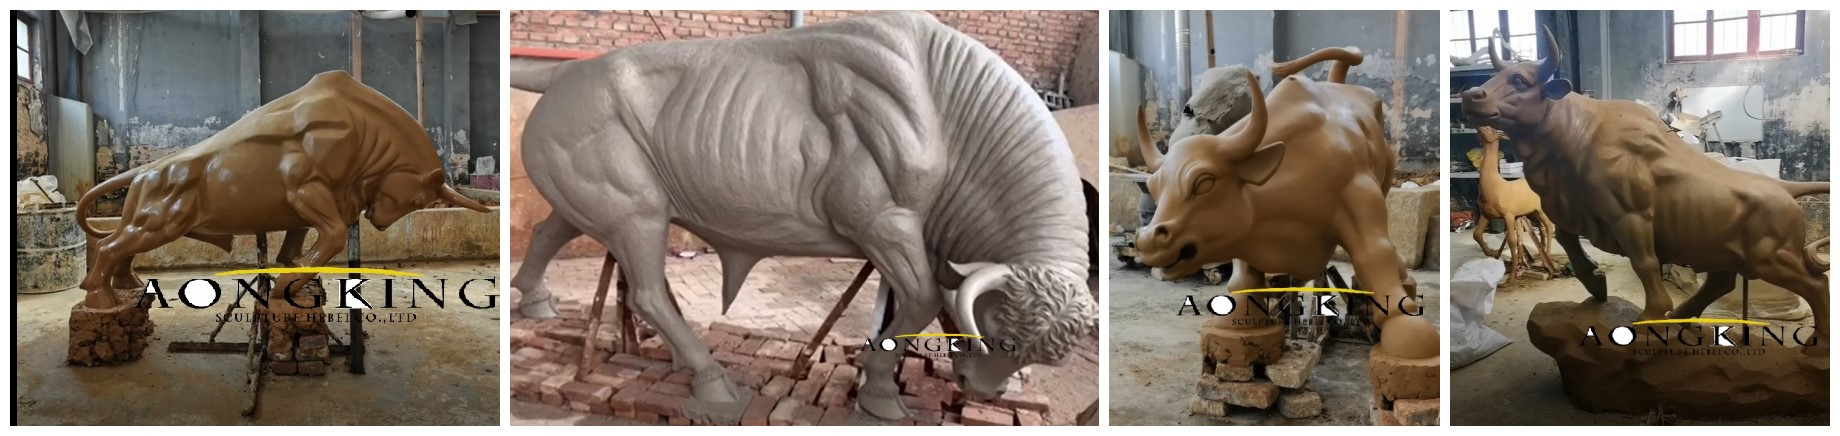 the clay sculpture of the bull